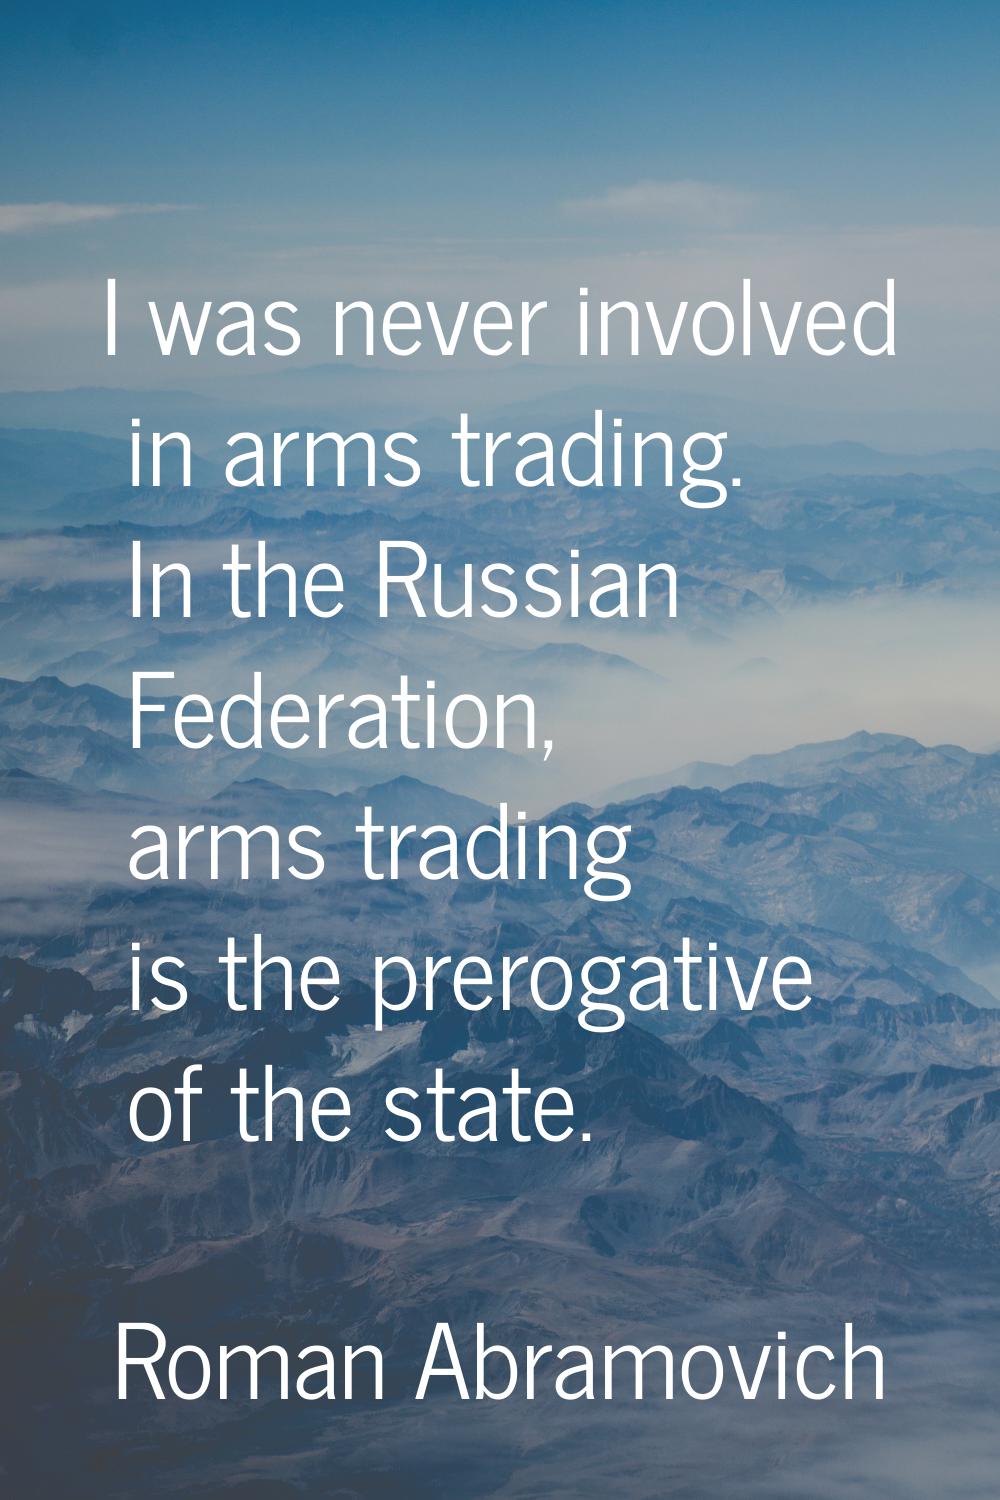 I was never involved in arms trading. In the Russian Federation, arms trading is the prerogative of